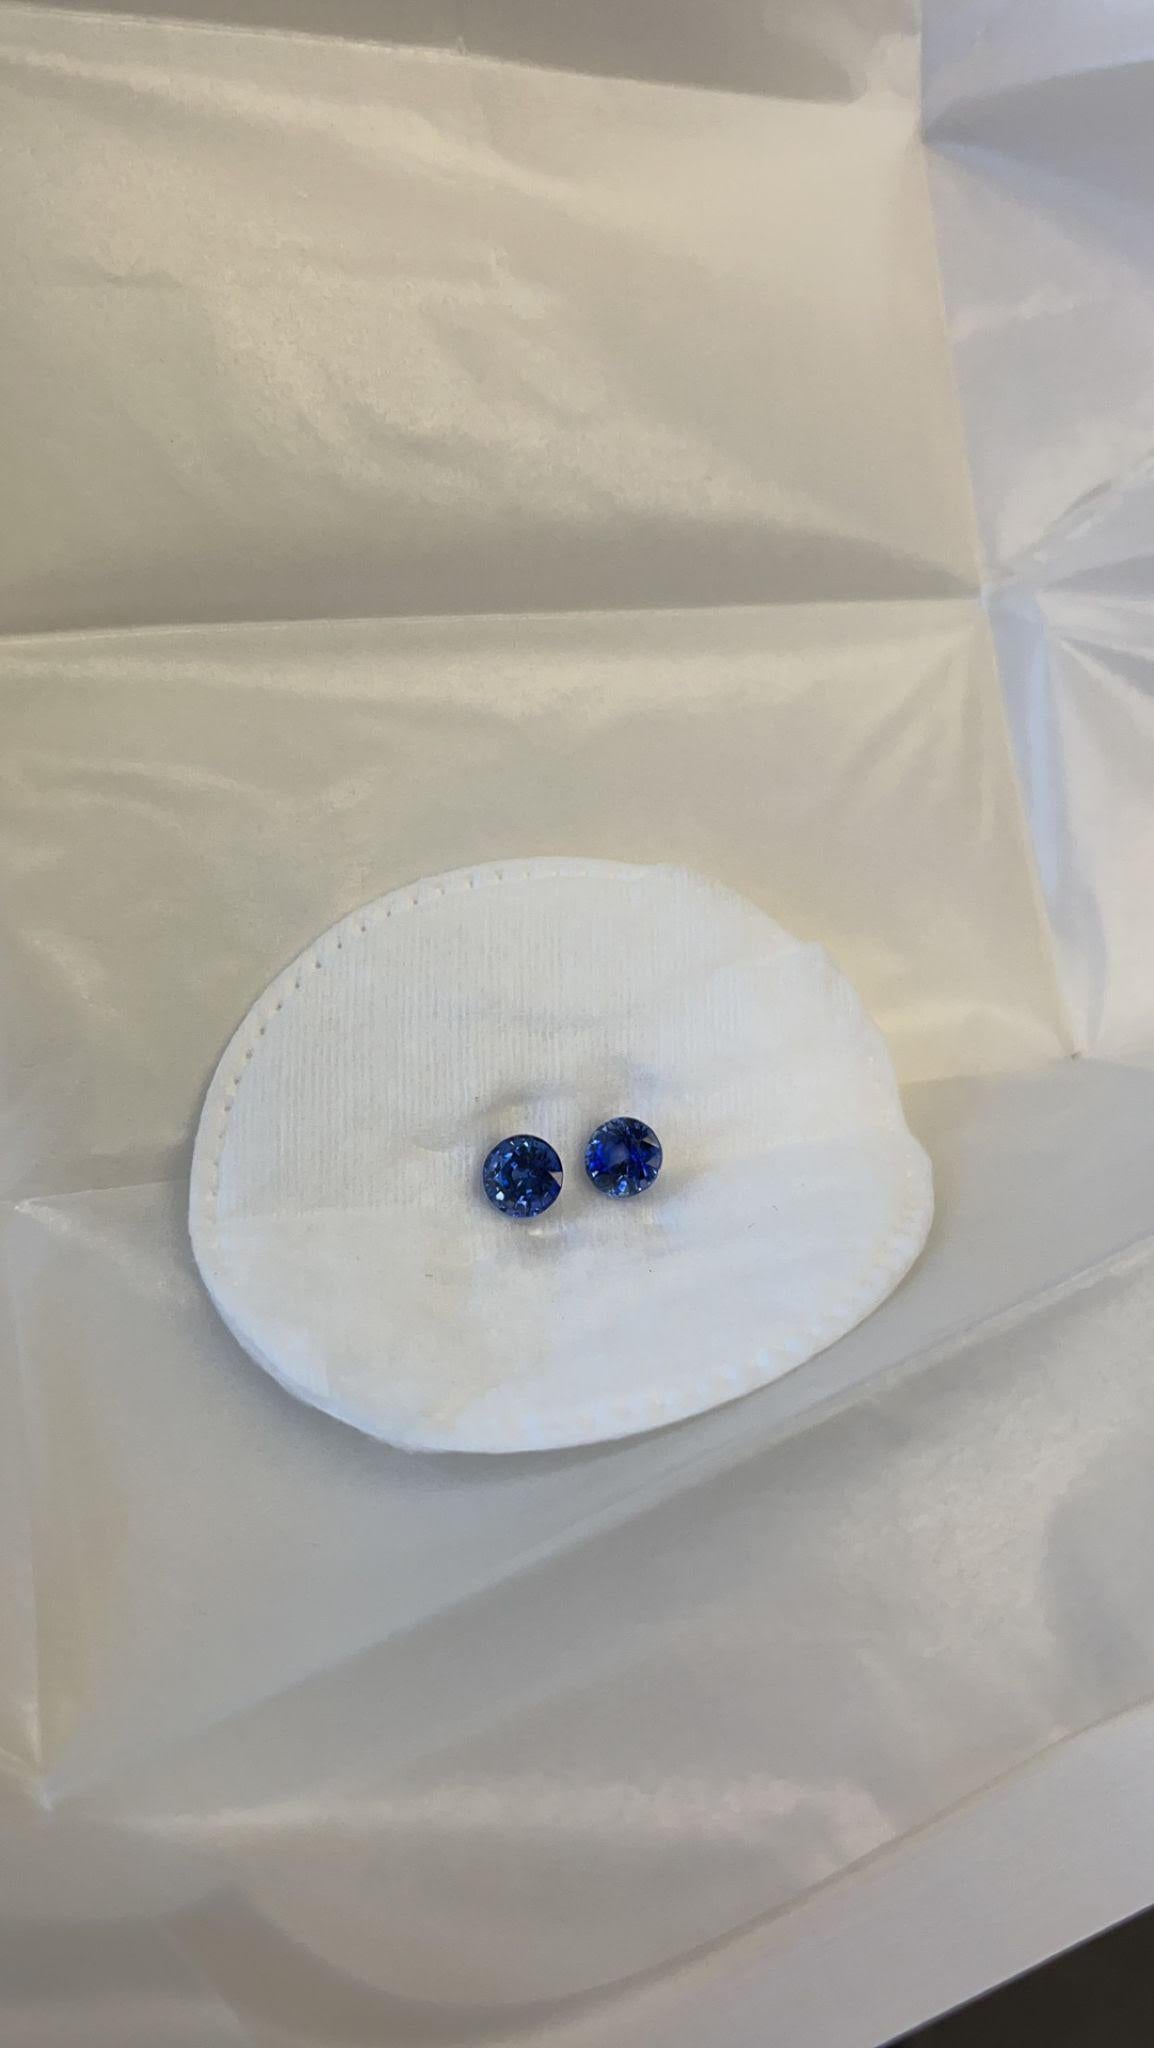 Match Pair of Ceylon Sapphires weighing 2.71 carats total
Measuring 6.4 mm
Cornflower Blue
This match pair is an extremely lively pair of sapphires